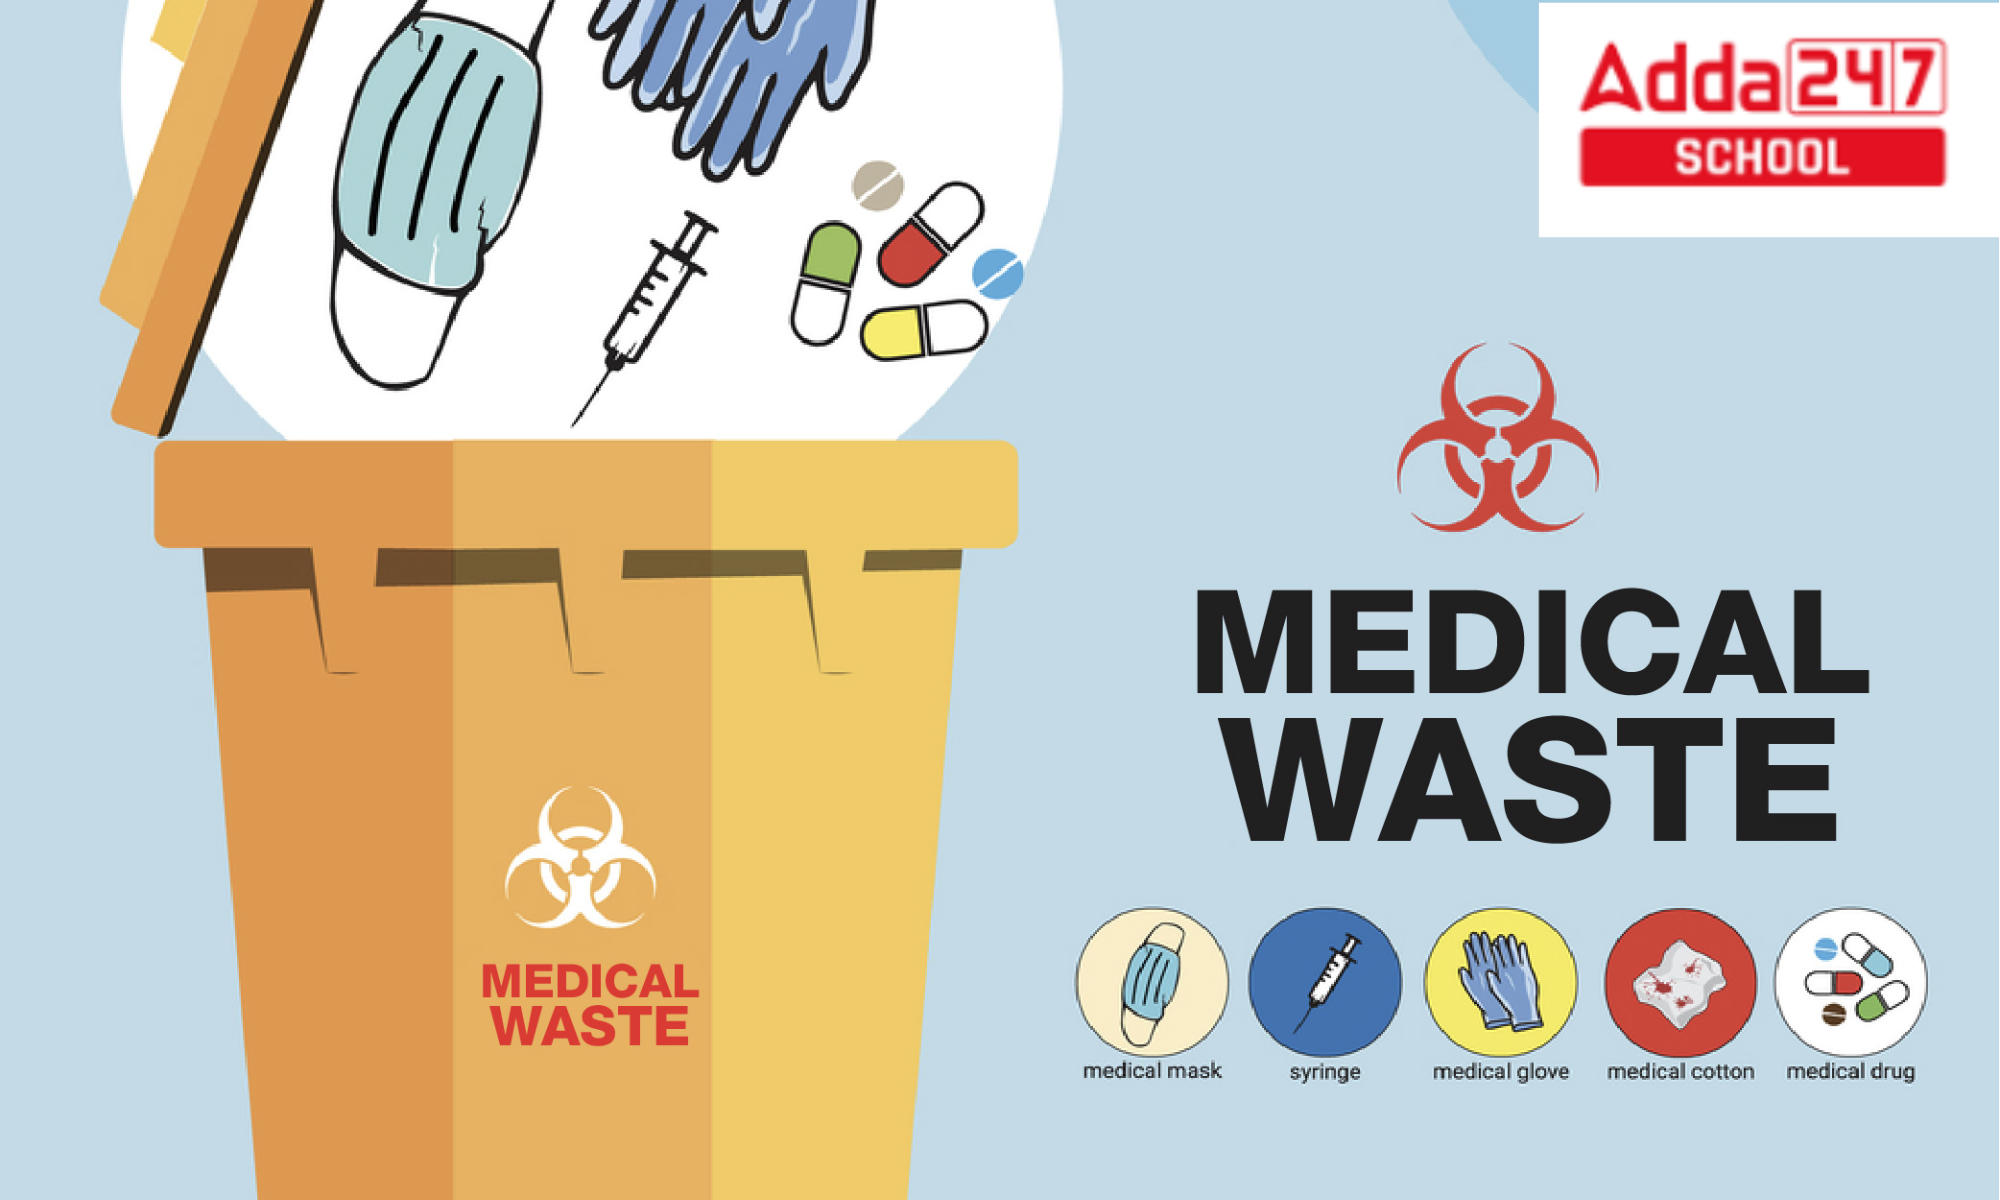 biomedical waste management research papers pdf